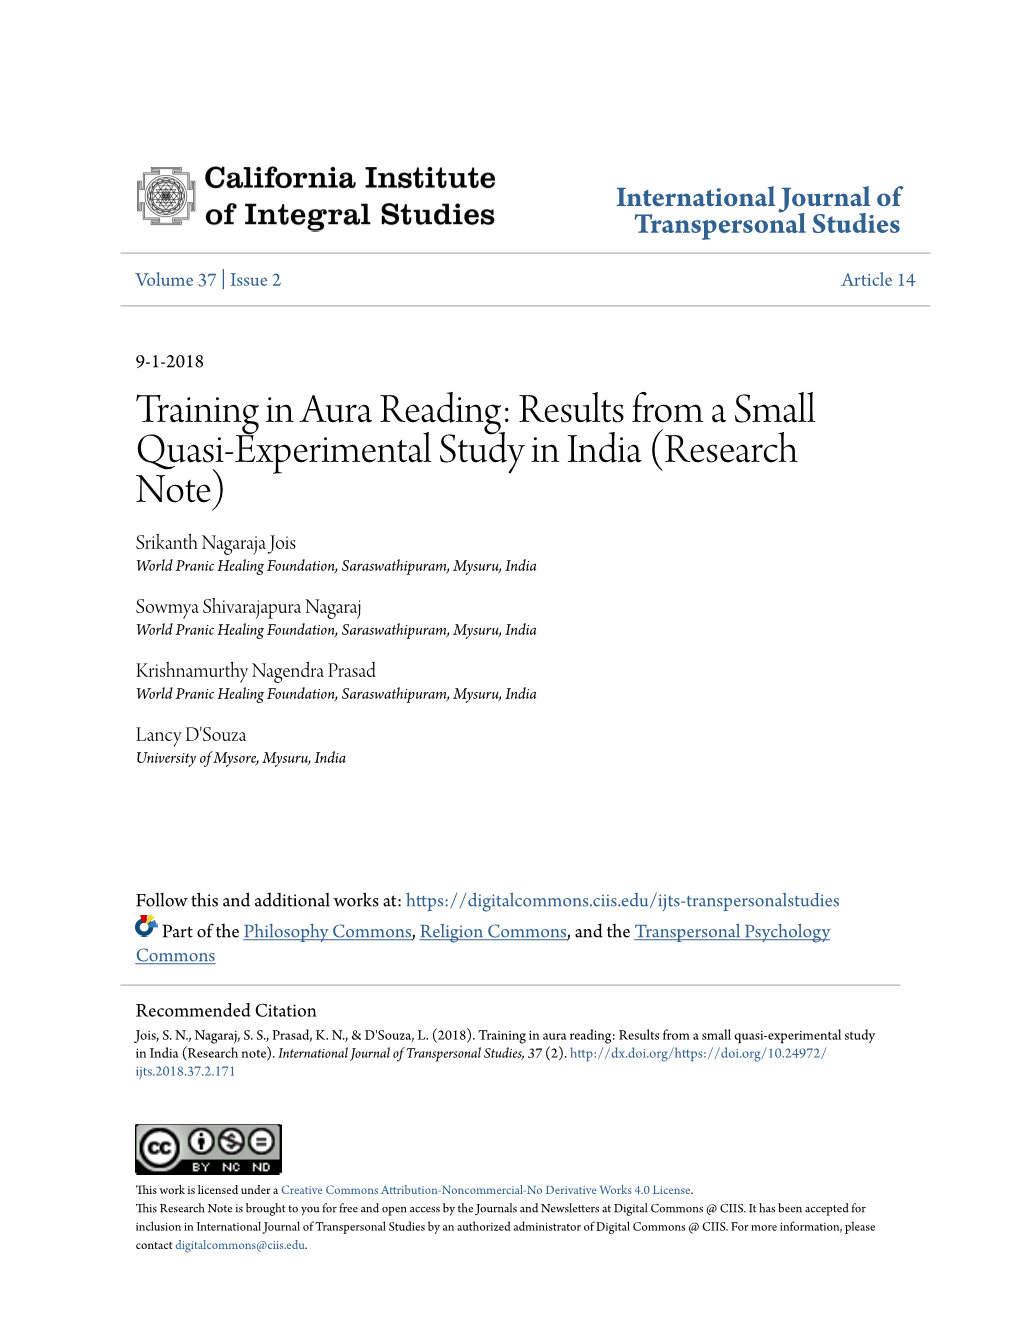 Training in Aura Reading: Results from a Small Quasi-Experimental